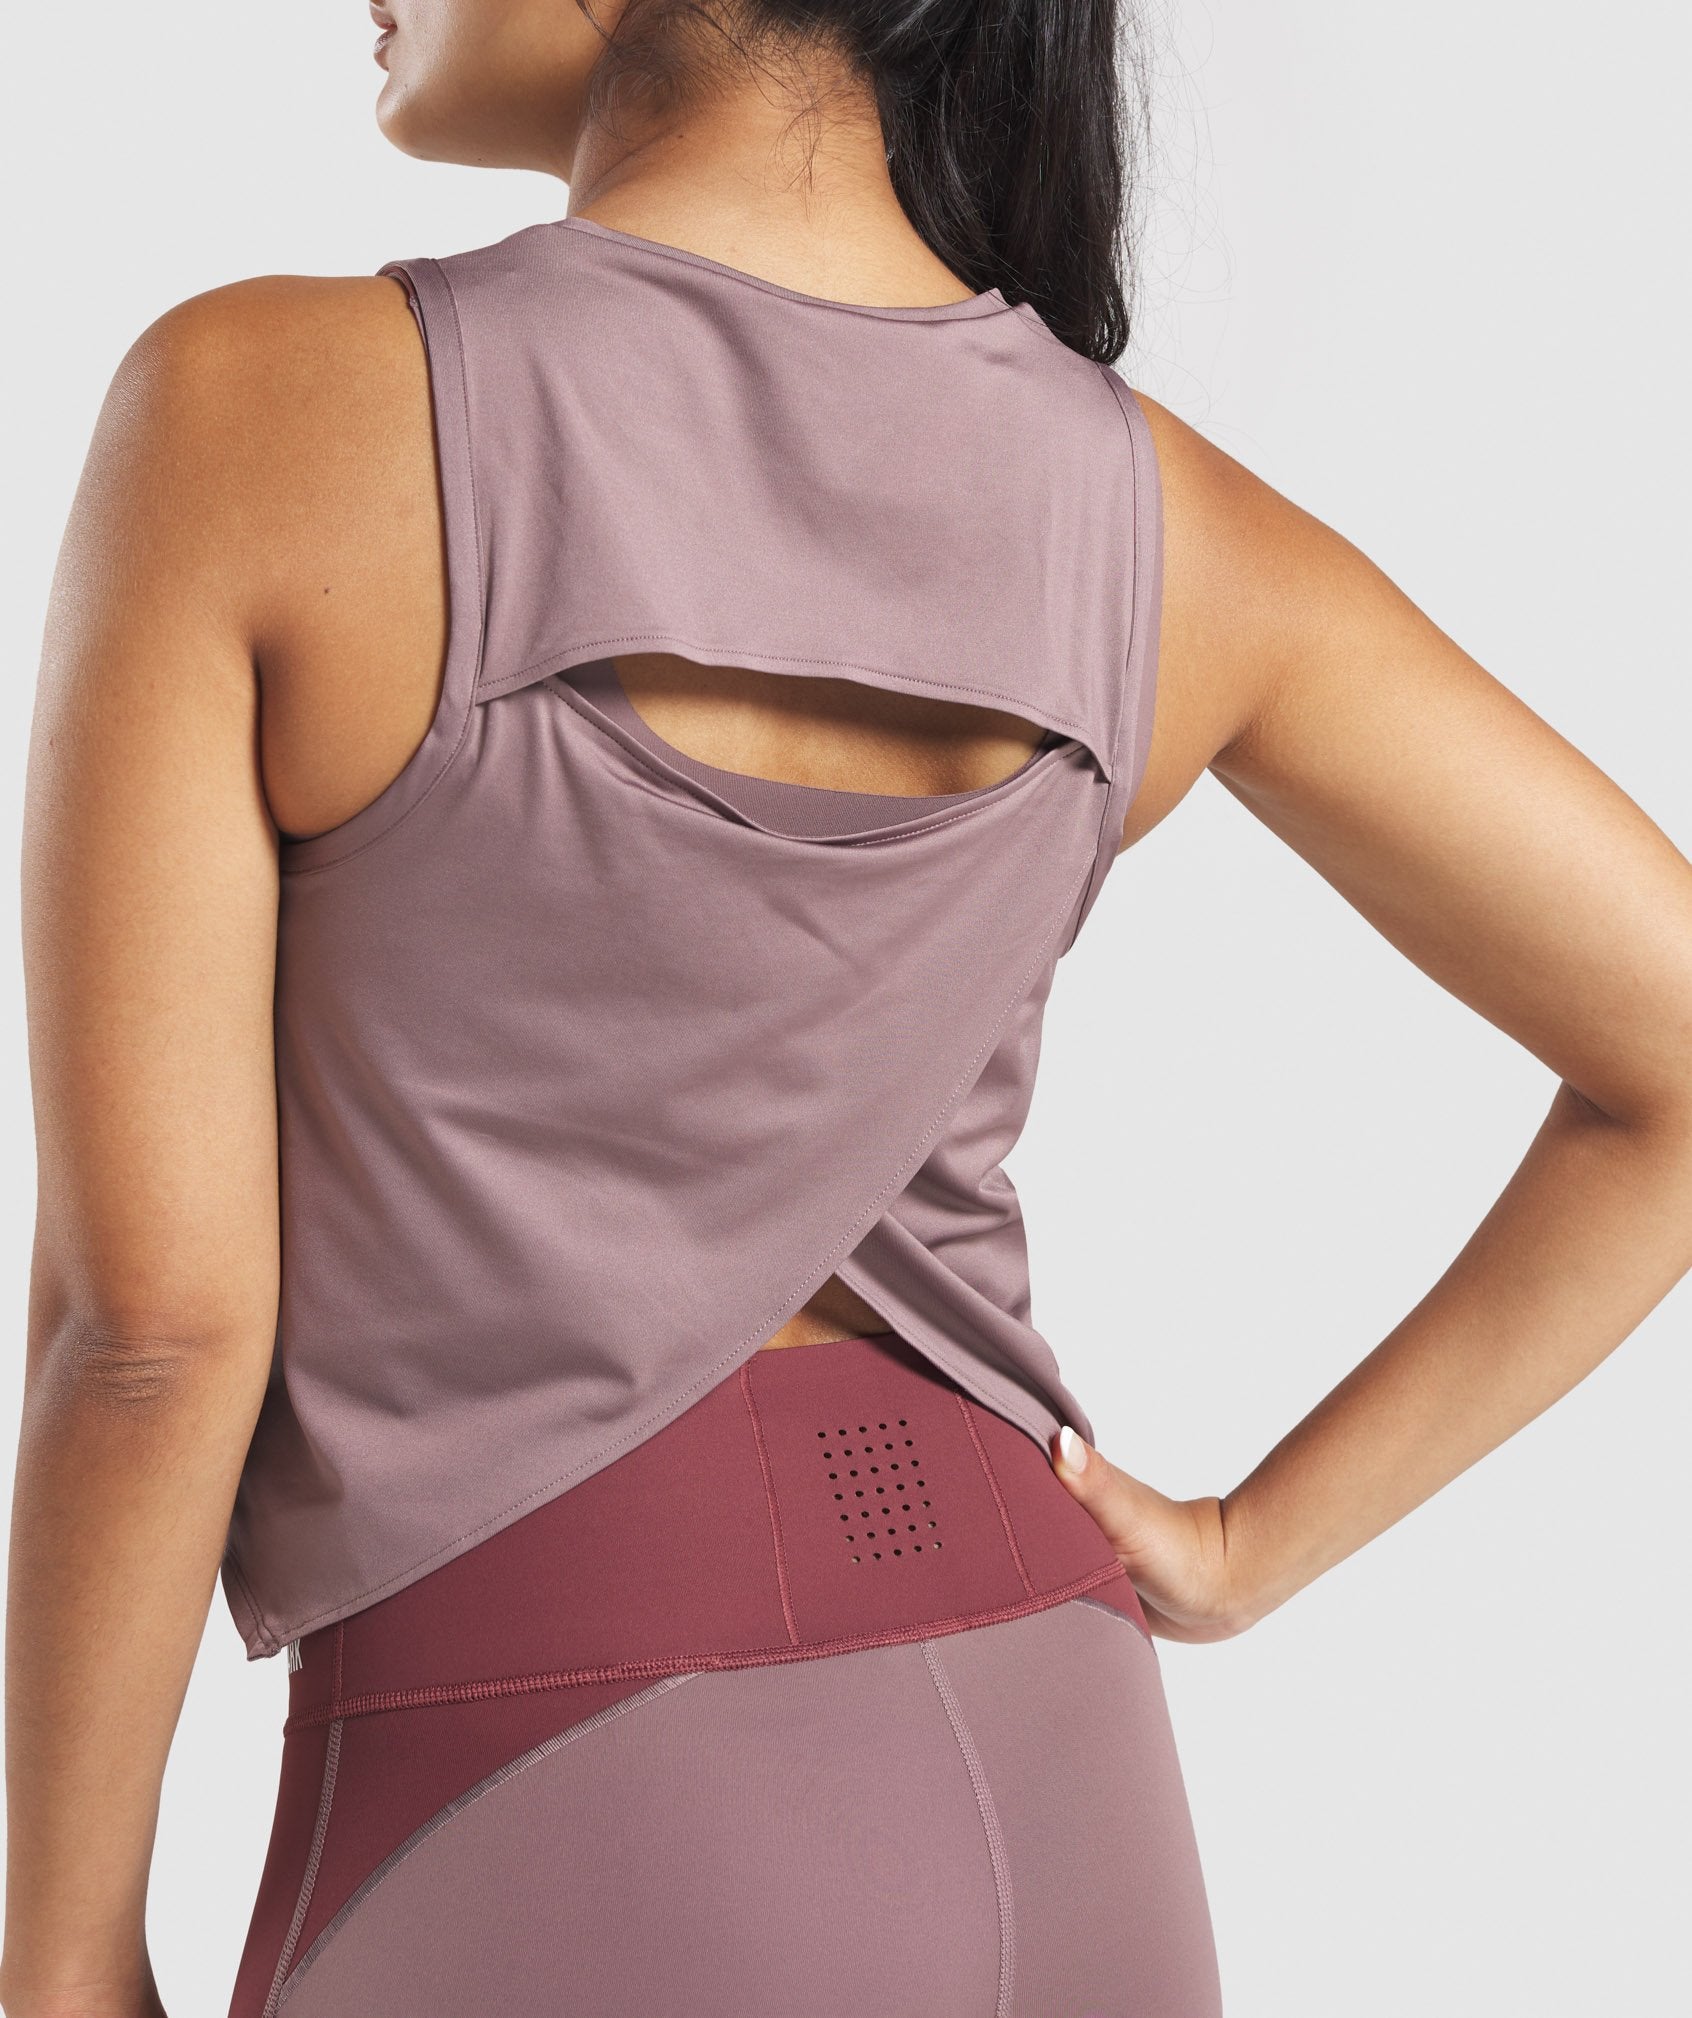 Euphoria Tank in Taupe - view 6